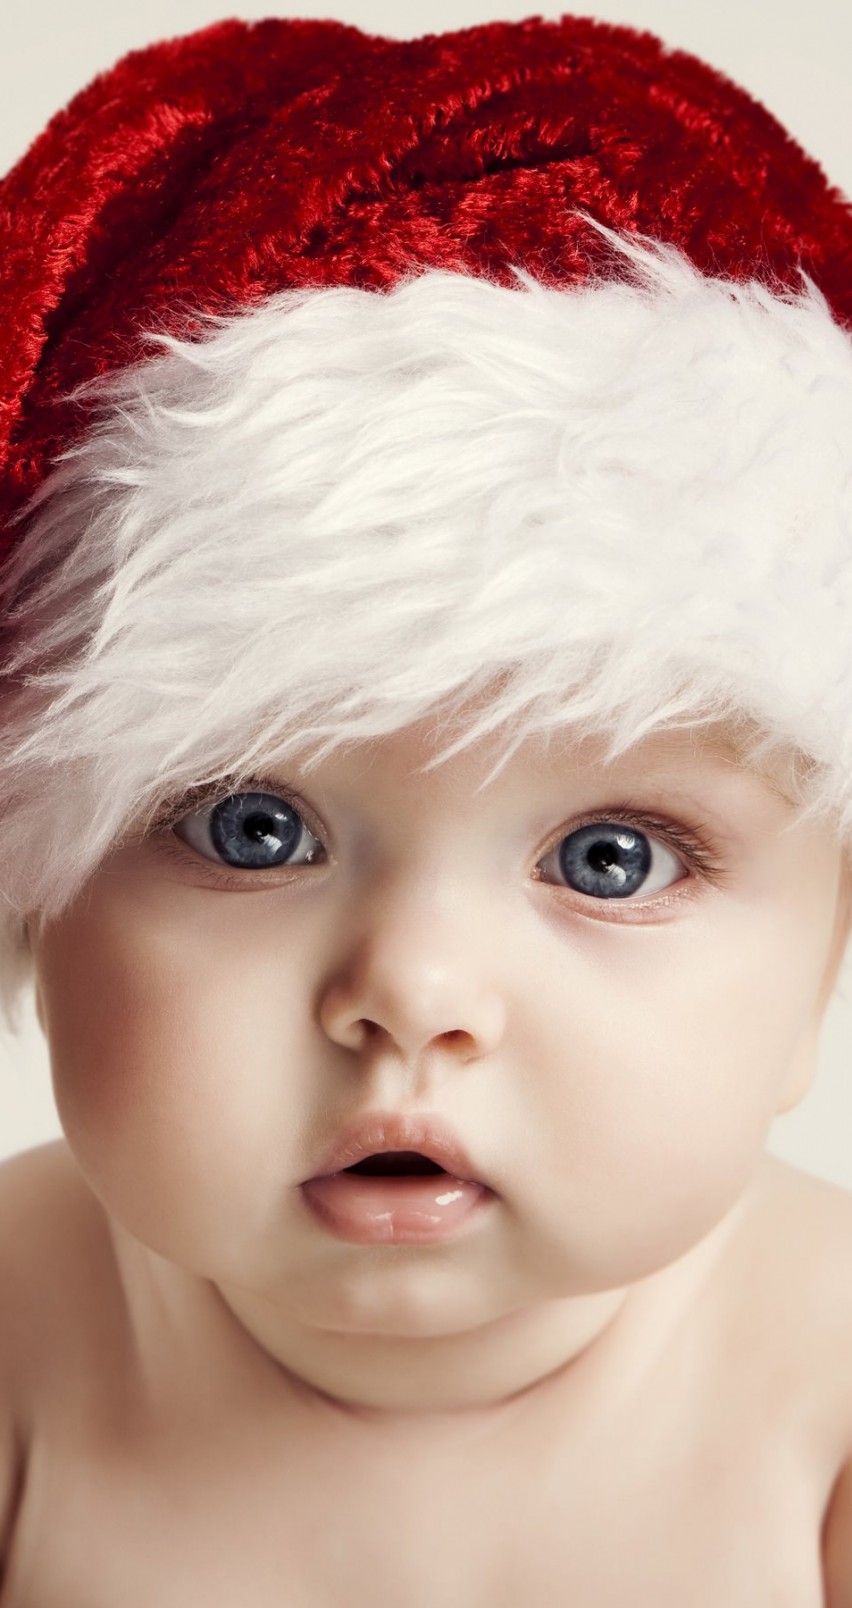 Santa Claus Baby Boy Wallpaper for Apple iPhone 6 / 6s